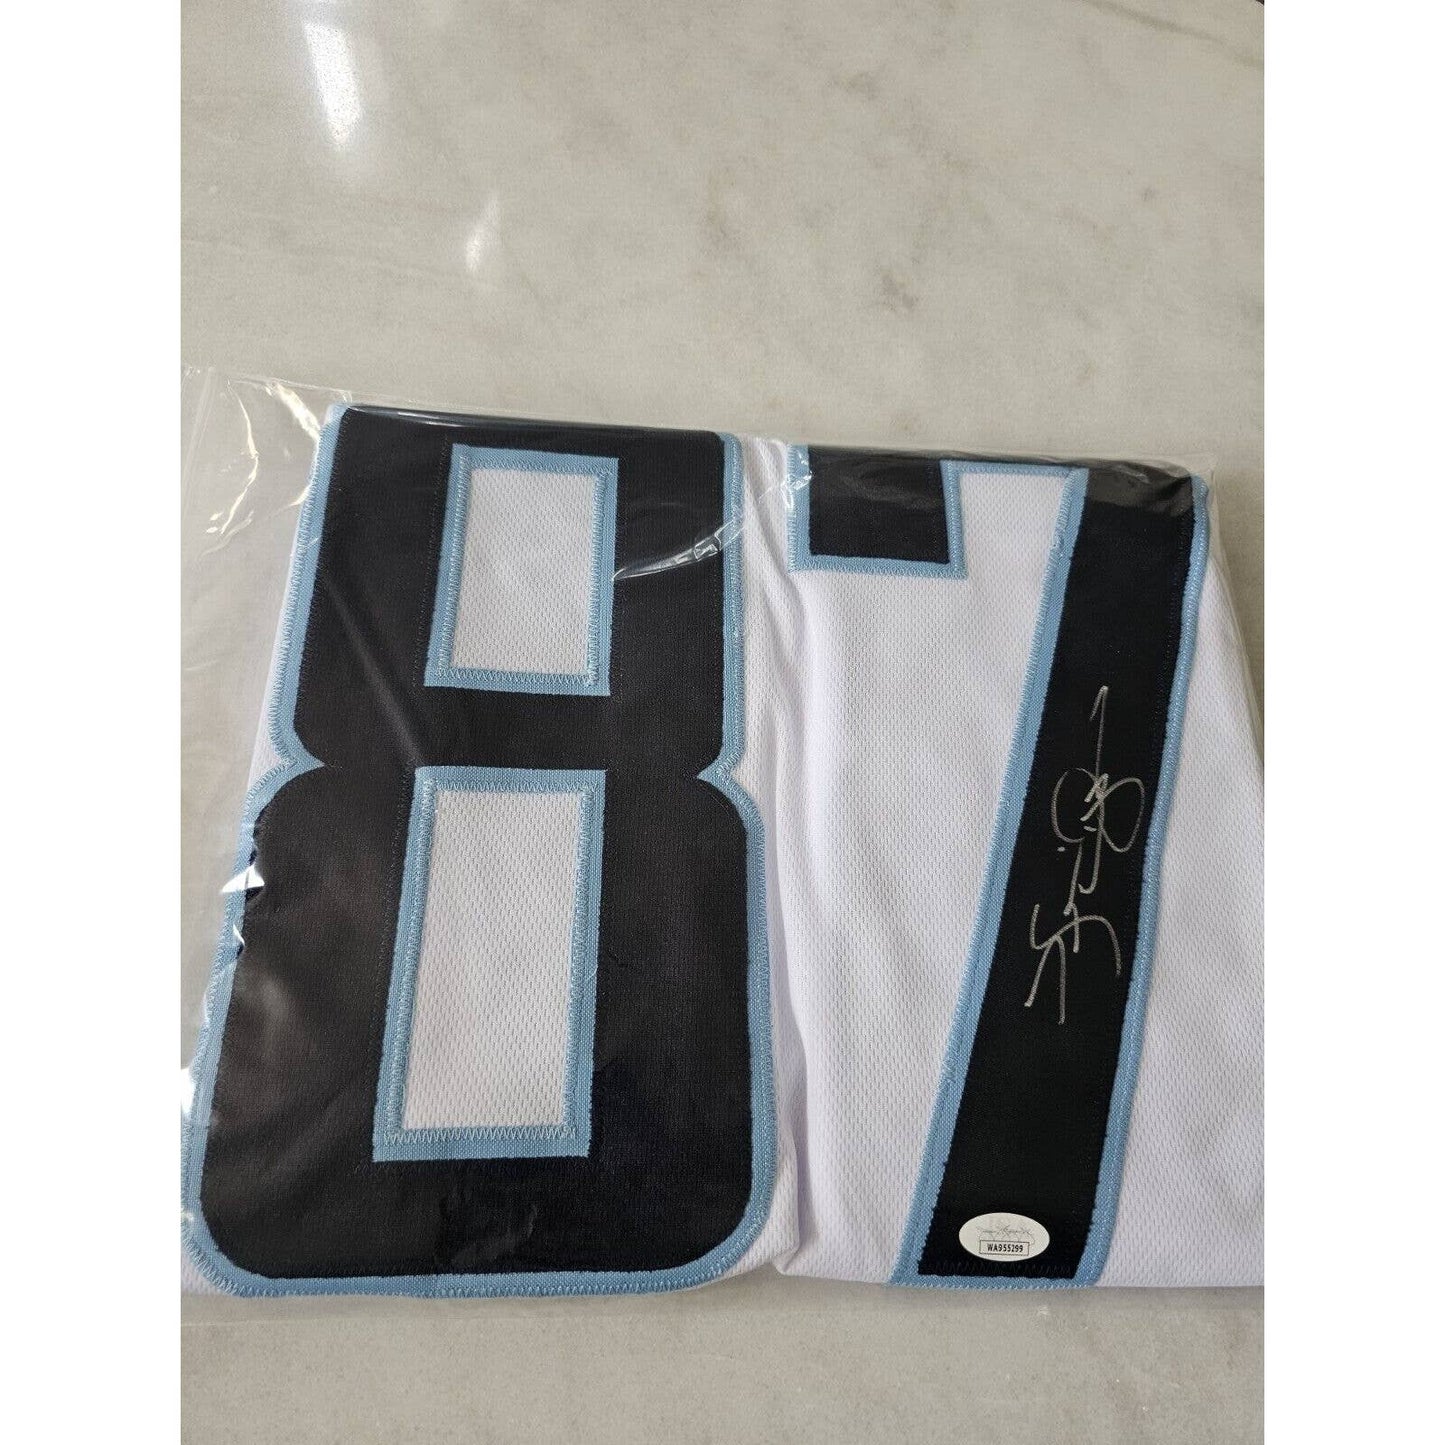 Kevin Dyson Autographed/Signed Jersey JSA Sticker Tennessee Titans